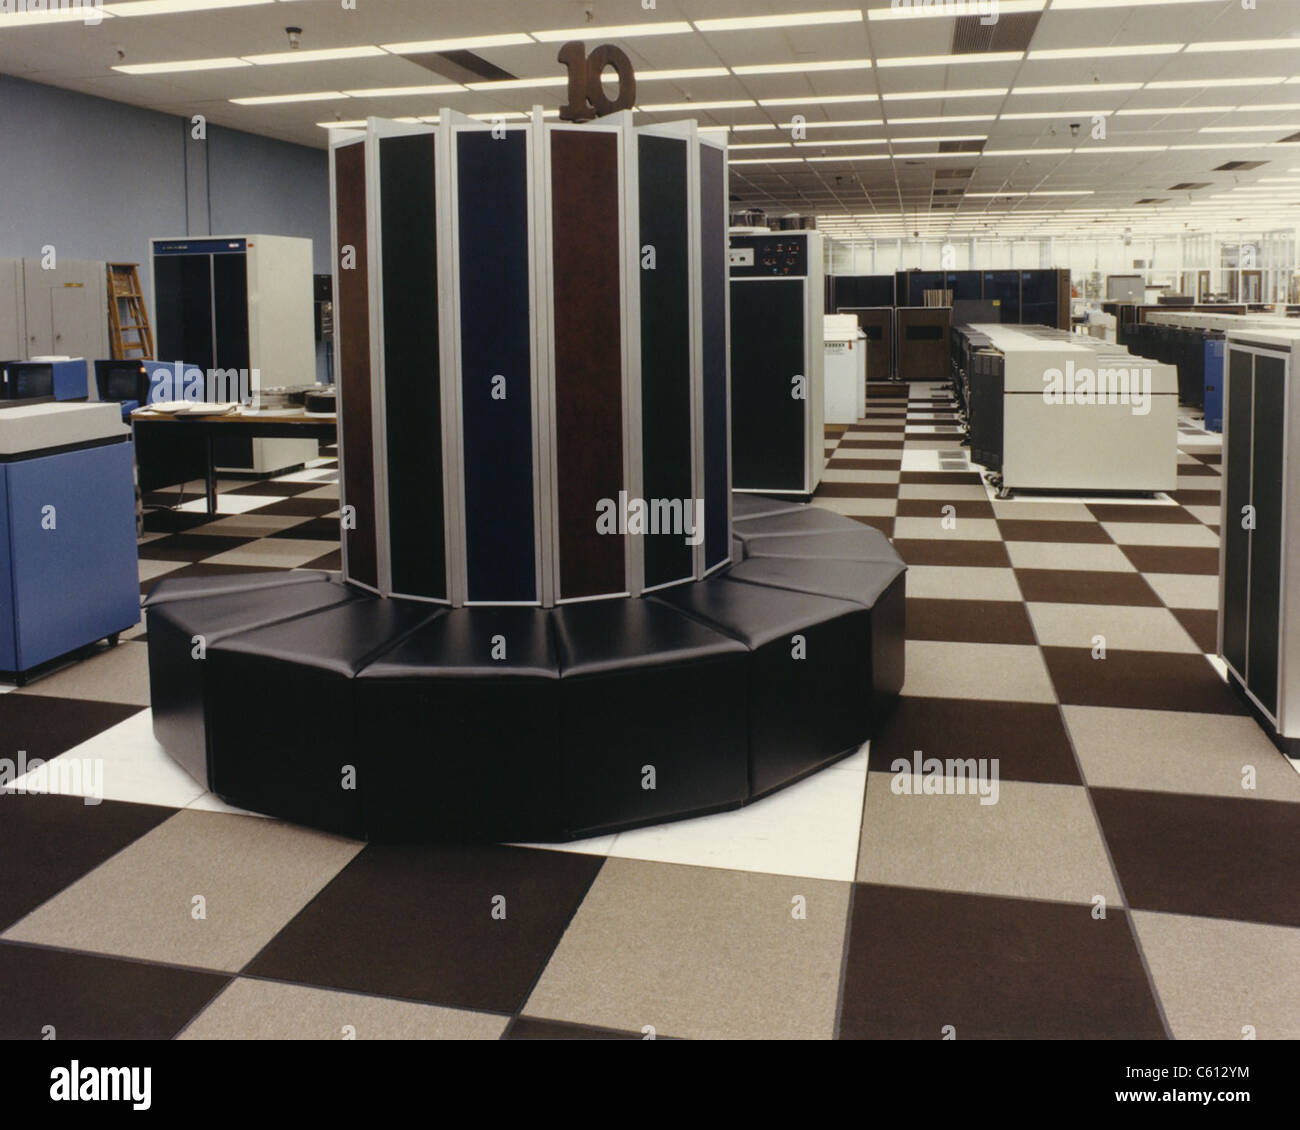 The first Cray-1 super computer was installed at Los Alamos National Laboratory (LANL) in 1976 for a six-month trial. Photo shows a Cray-1 computer in use at LANL in 1982. Stock Photo